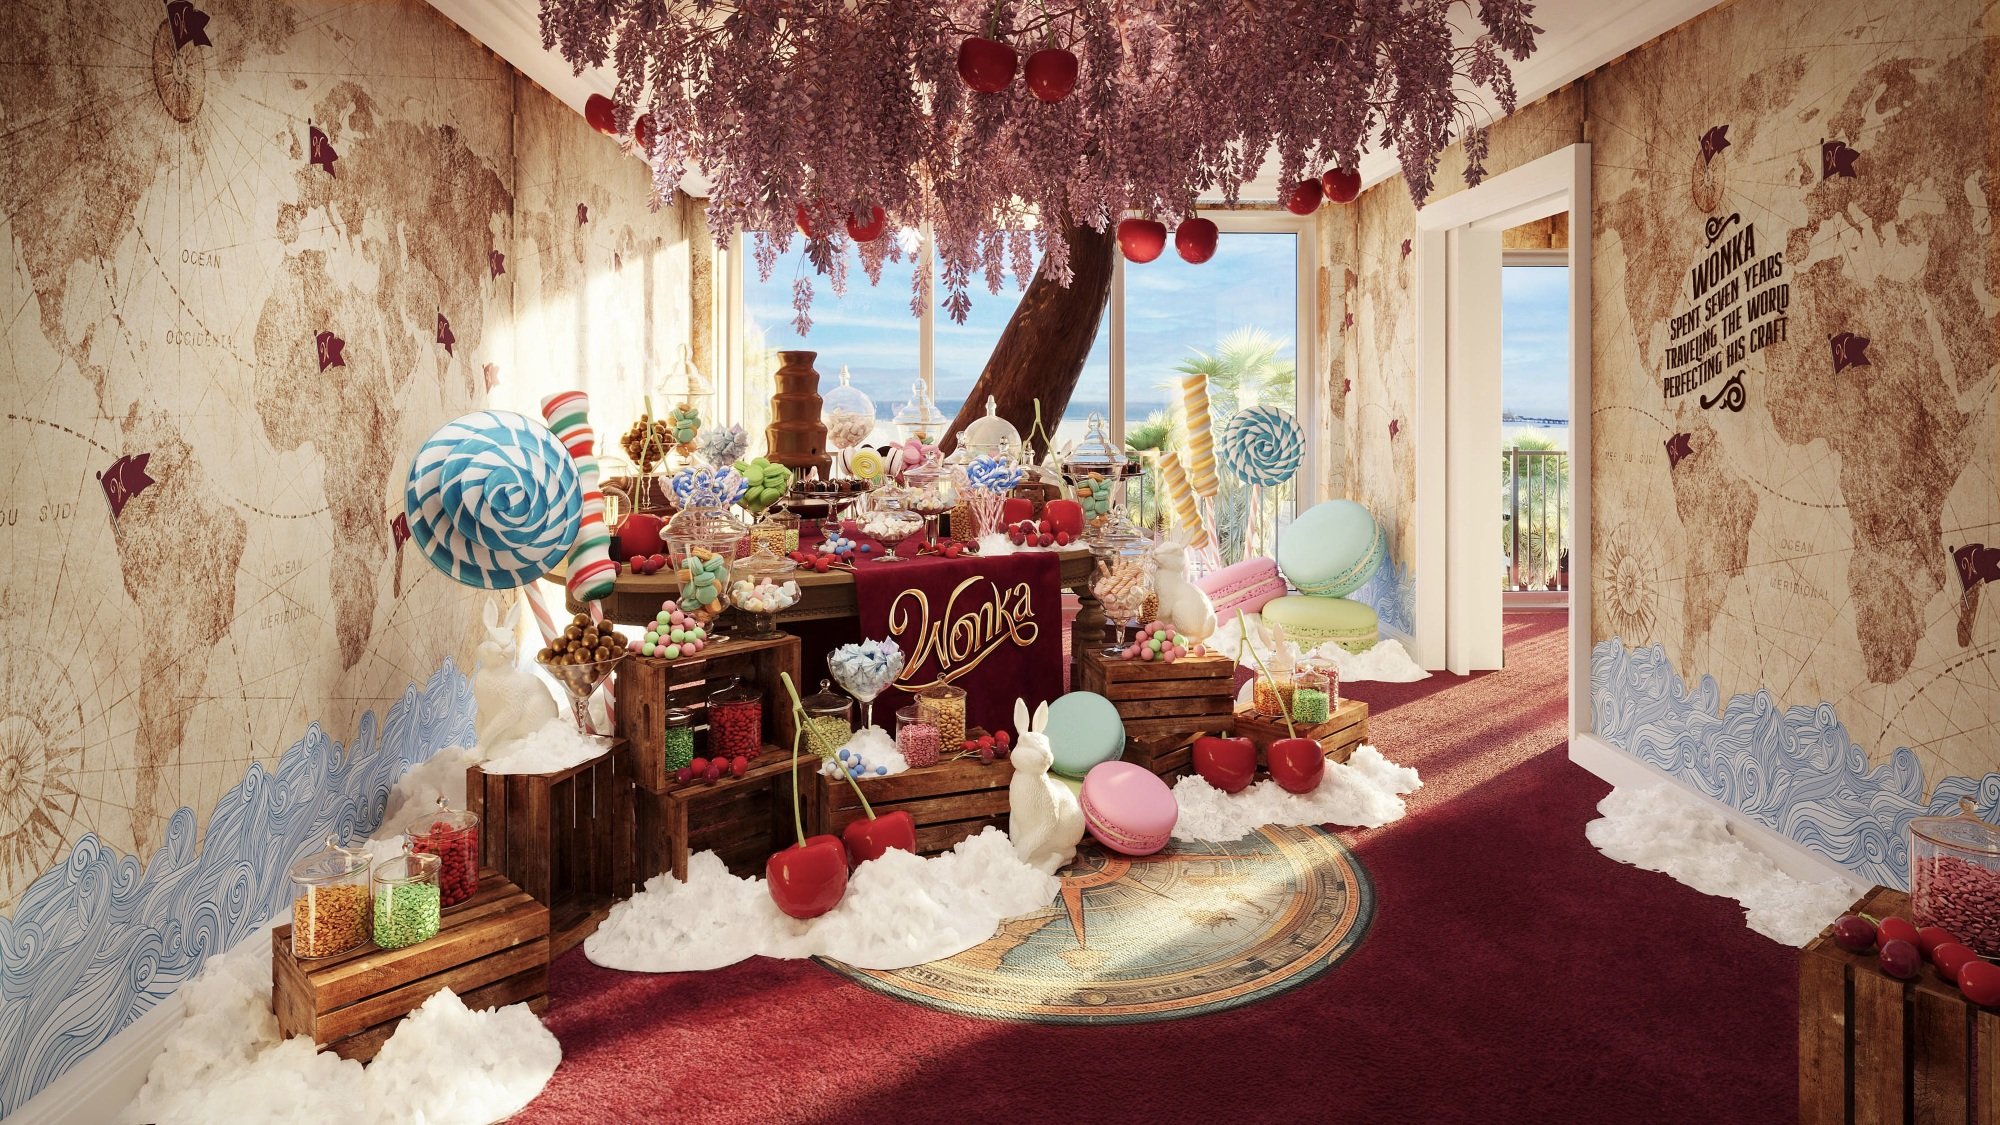 A "Wonka"-themed hotel room with a large chocolate tree and lollipops at its center.